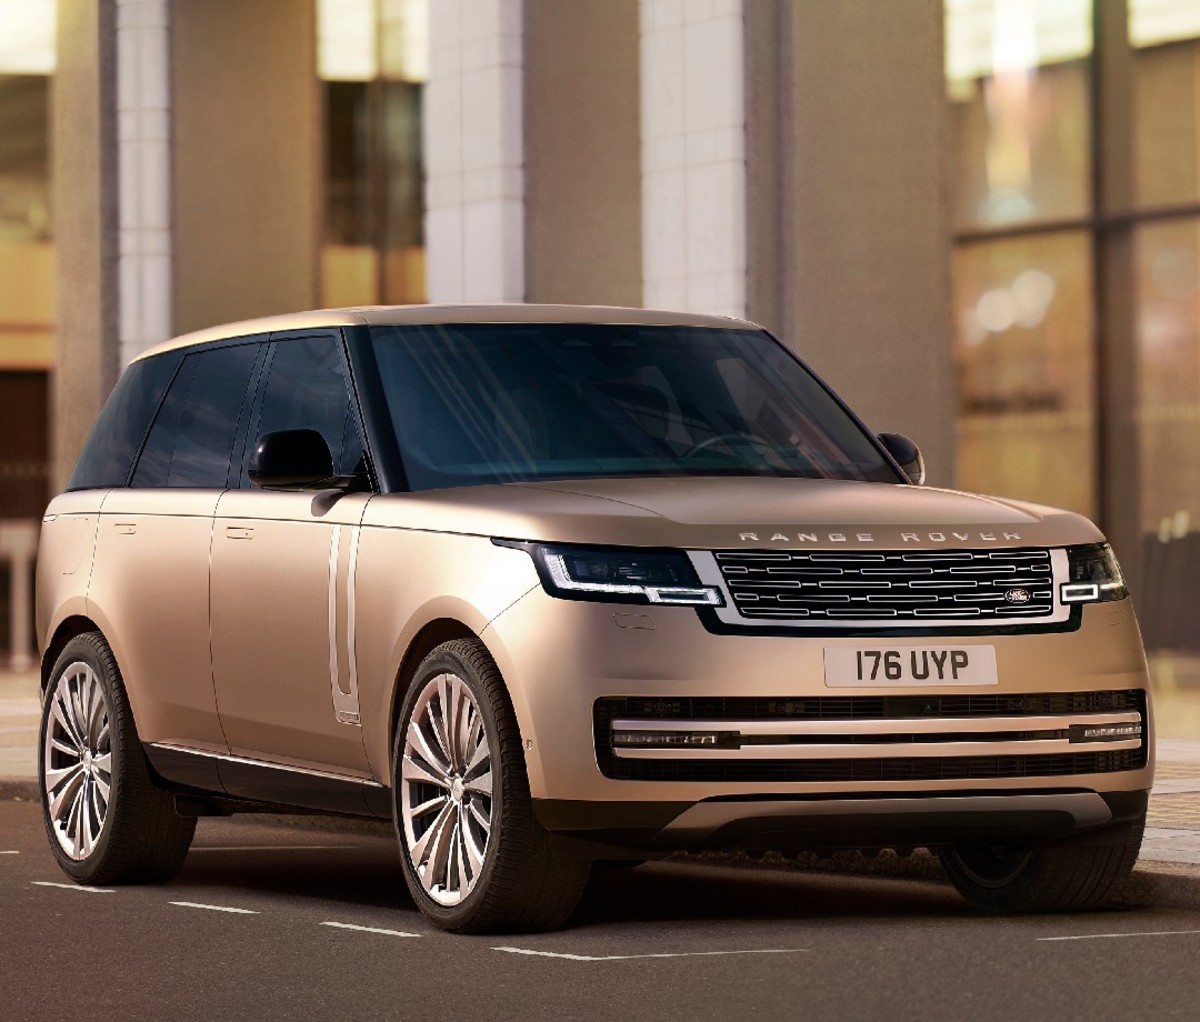 Gold 2022 Range Rover SUV parked on a rendering of a city street